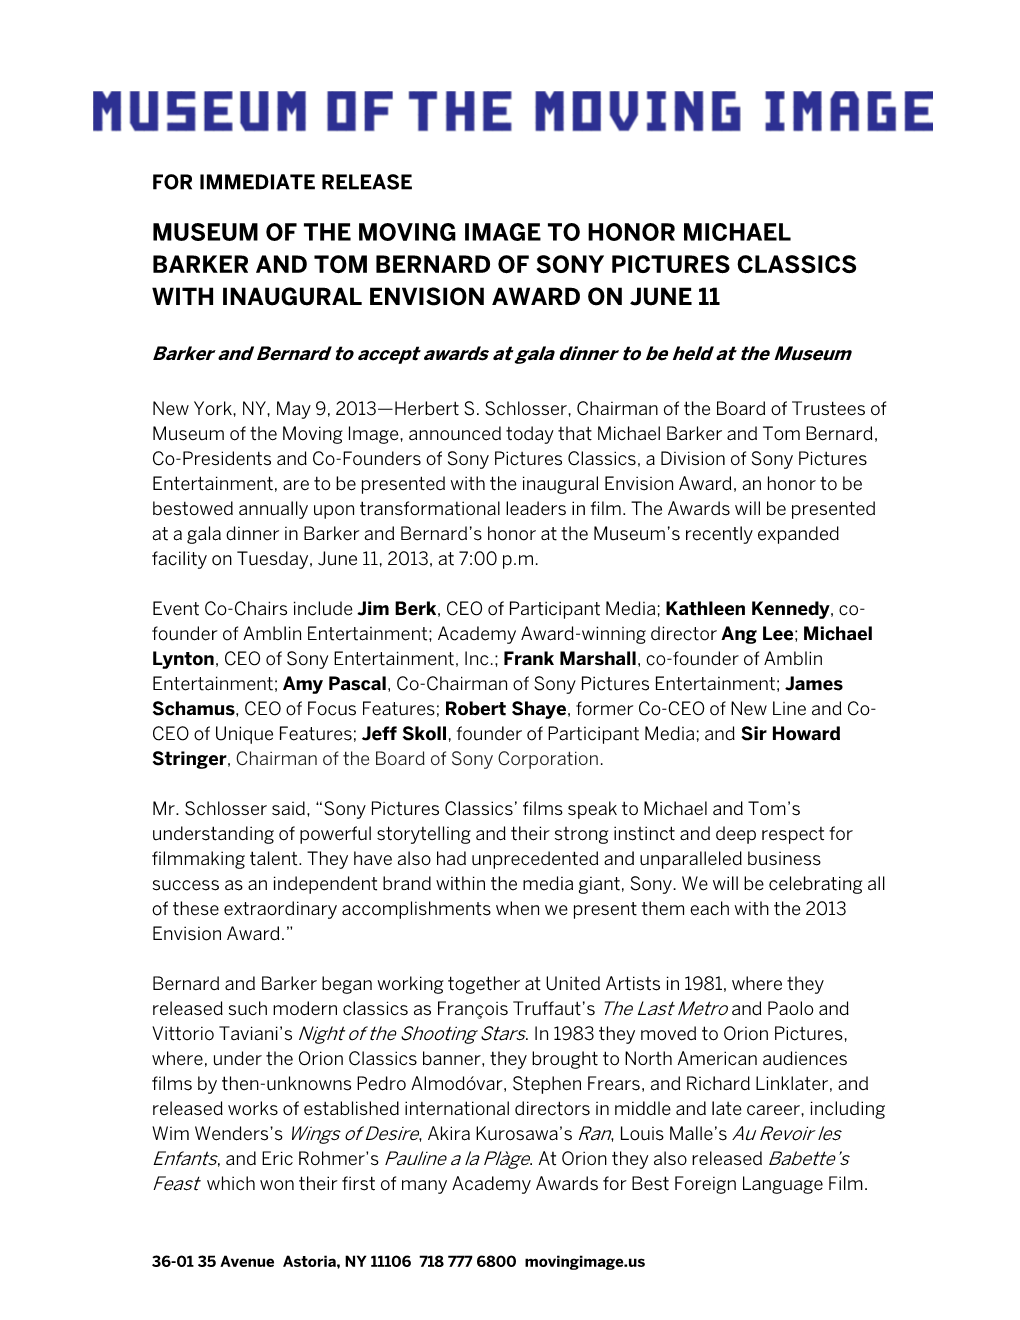 Museum of the Moving Image to Honor Michael Barker and Tom Bernard of Sony Pictures Classics with Inaugural Envision Award on June 11